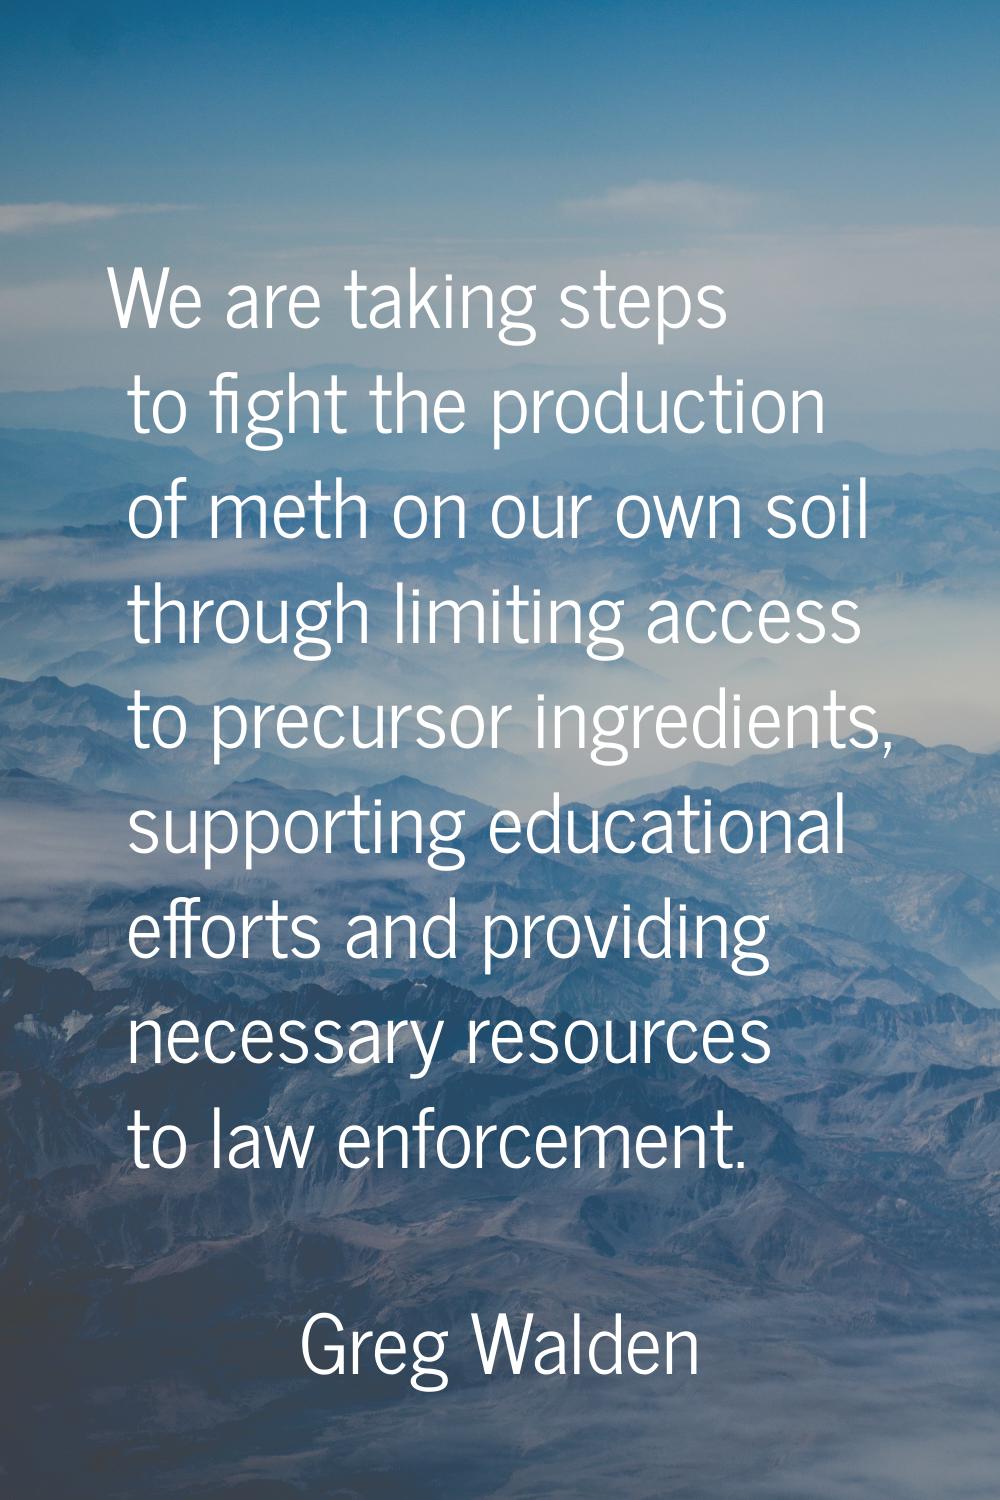 We are taking steps to fight the production of meth on our own soil through limiting access to prec